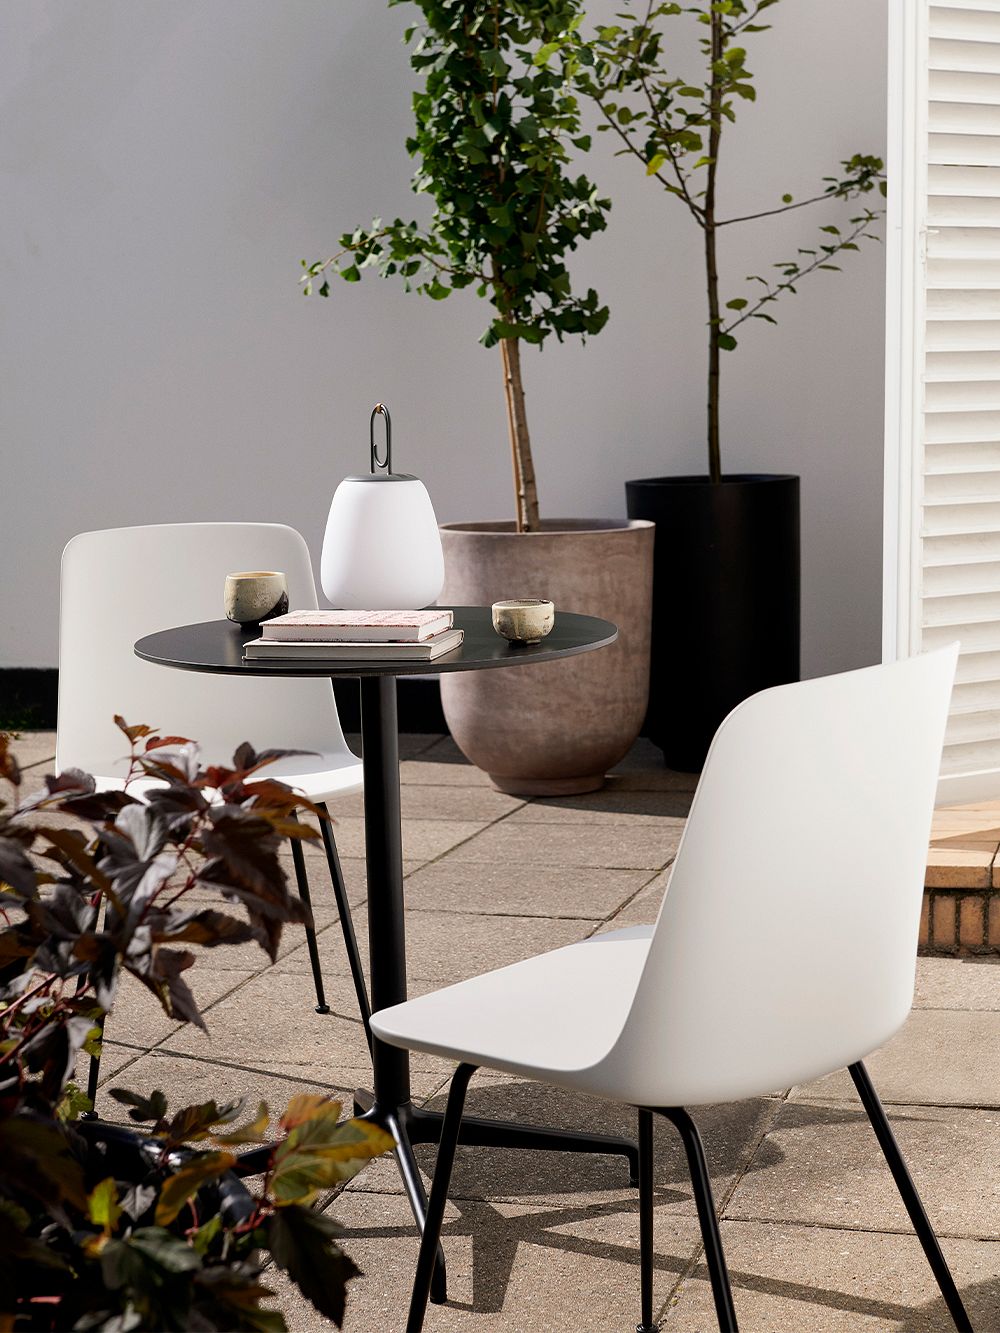 &Tradition Rely Outdoor HW70 chair and ATD5 table